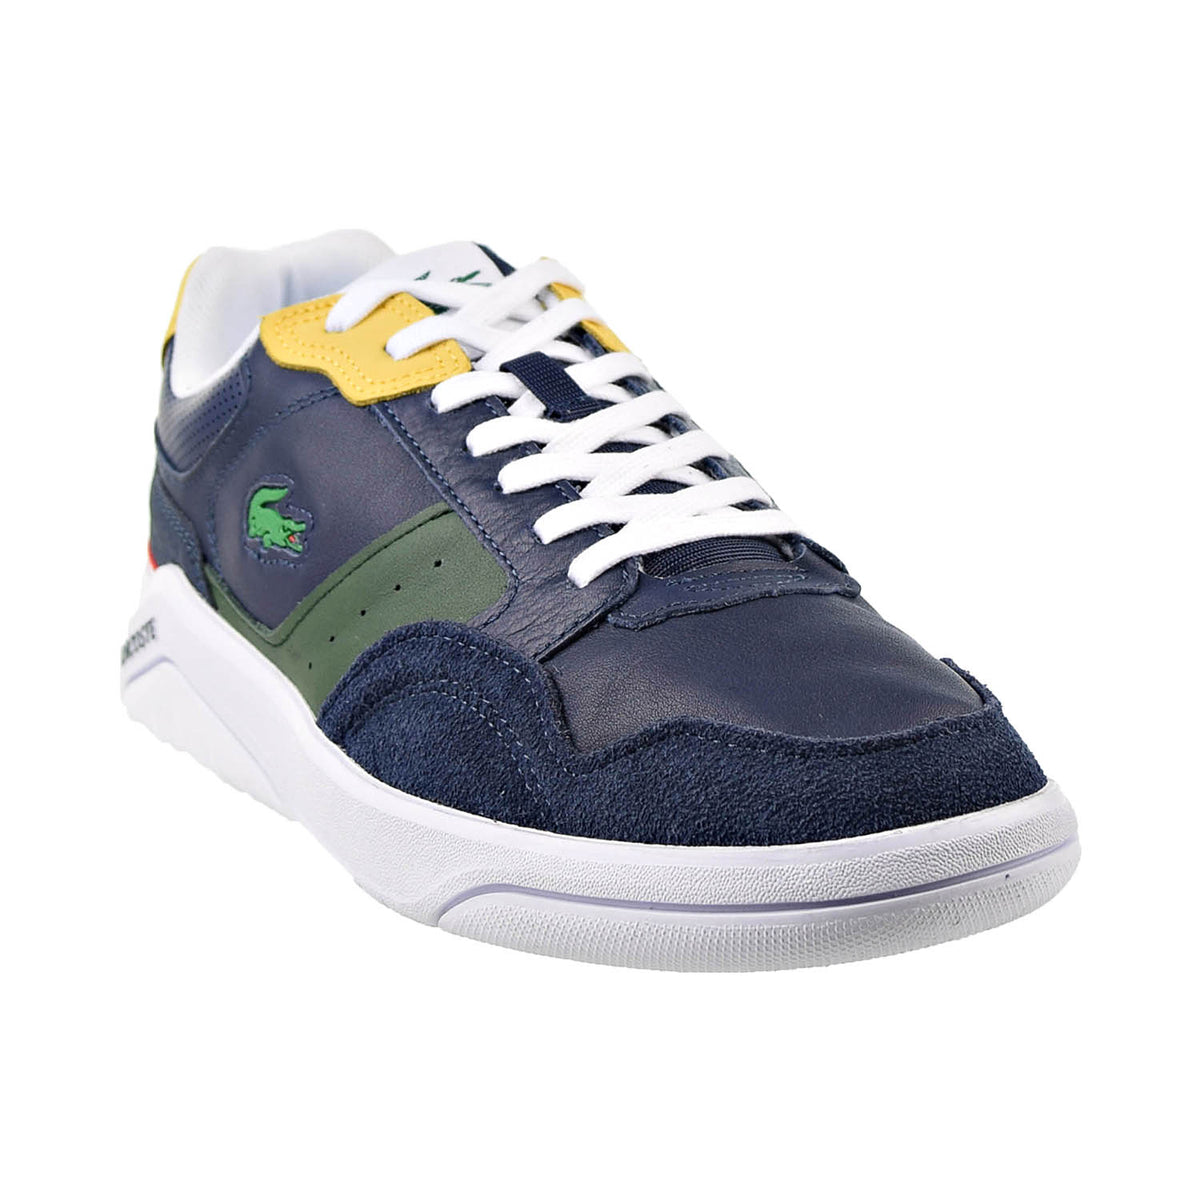 Lacoste Game Advance Luxe 0121 2 Sneakers Men